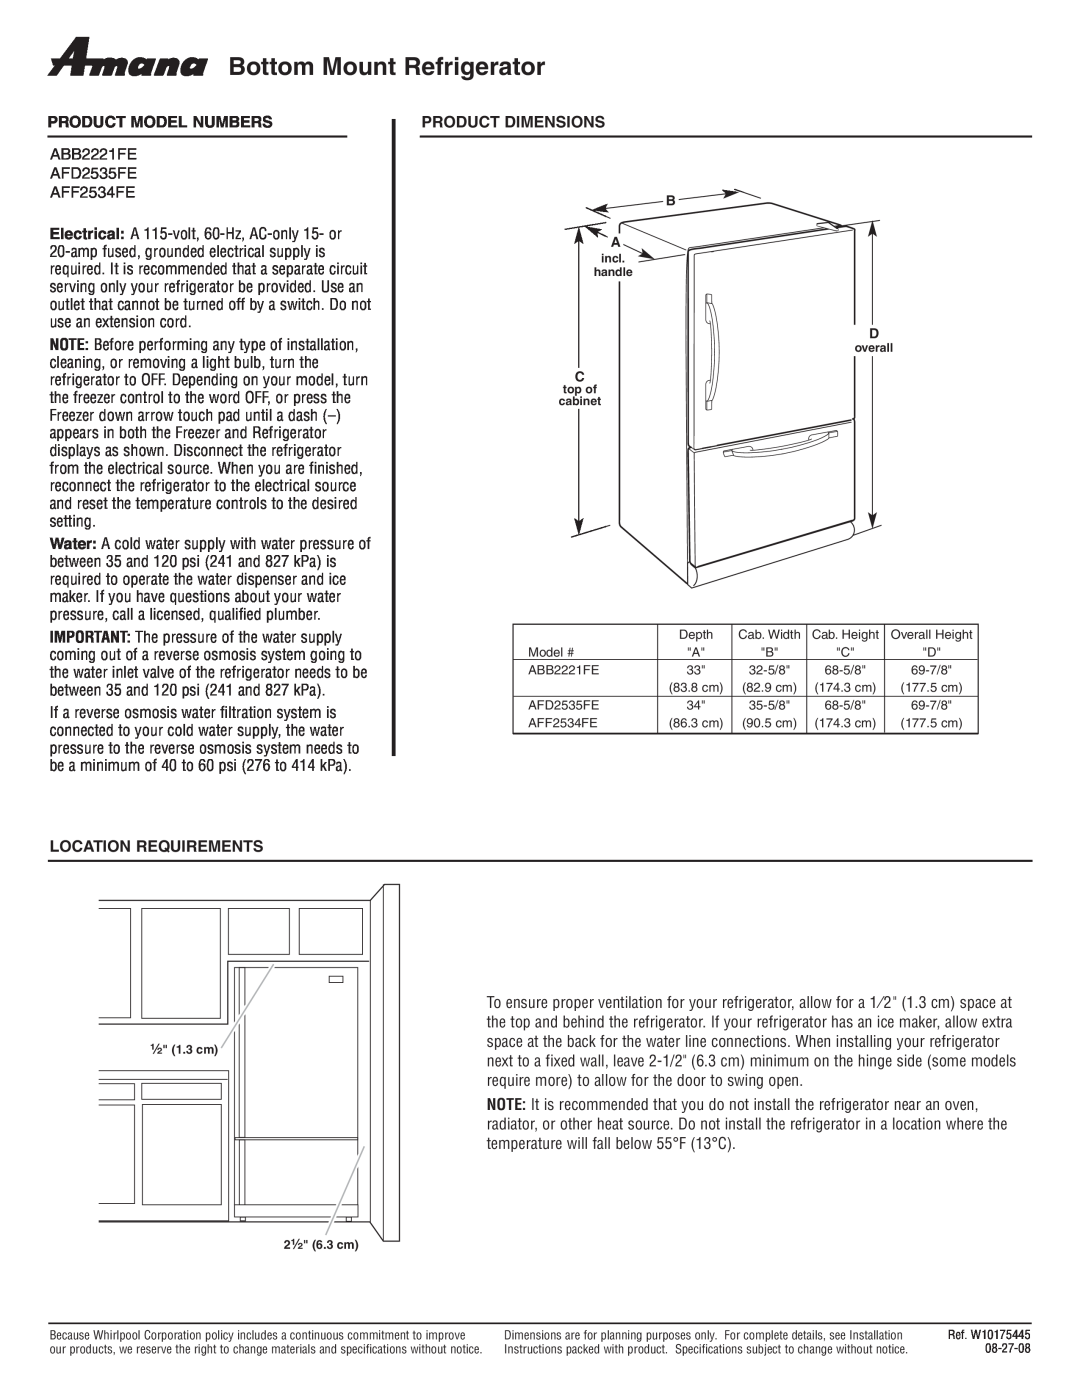 Amana ABB2221FE dimensions Bottom Mount Refrigerator, Product Model Numbers, Product Dimensions, Location Requirements 